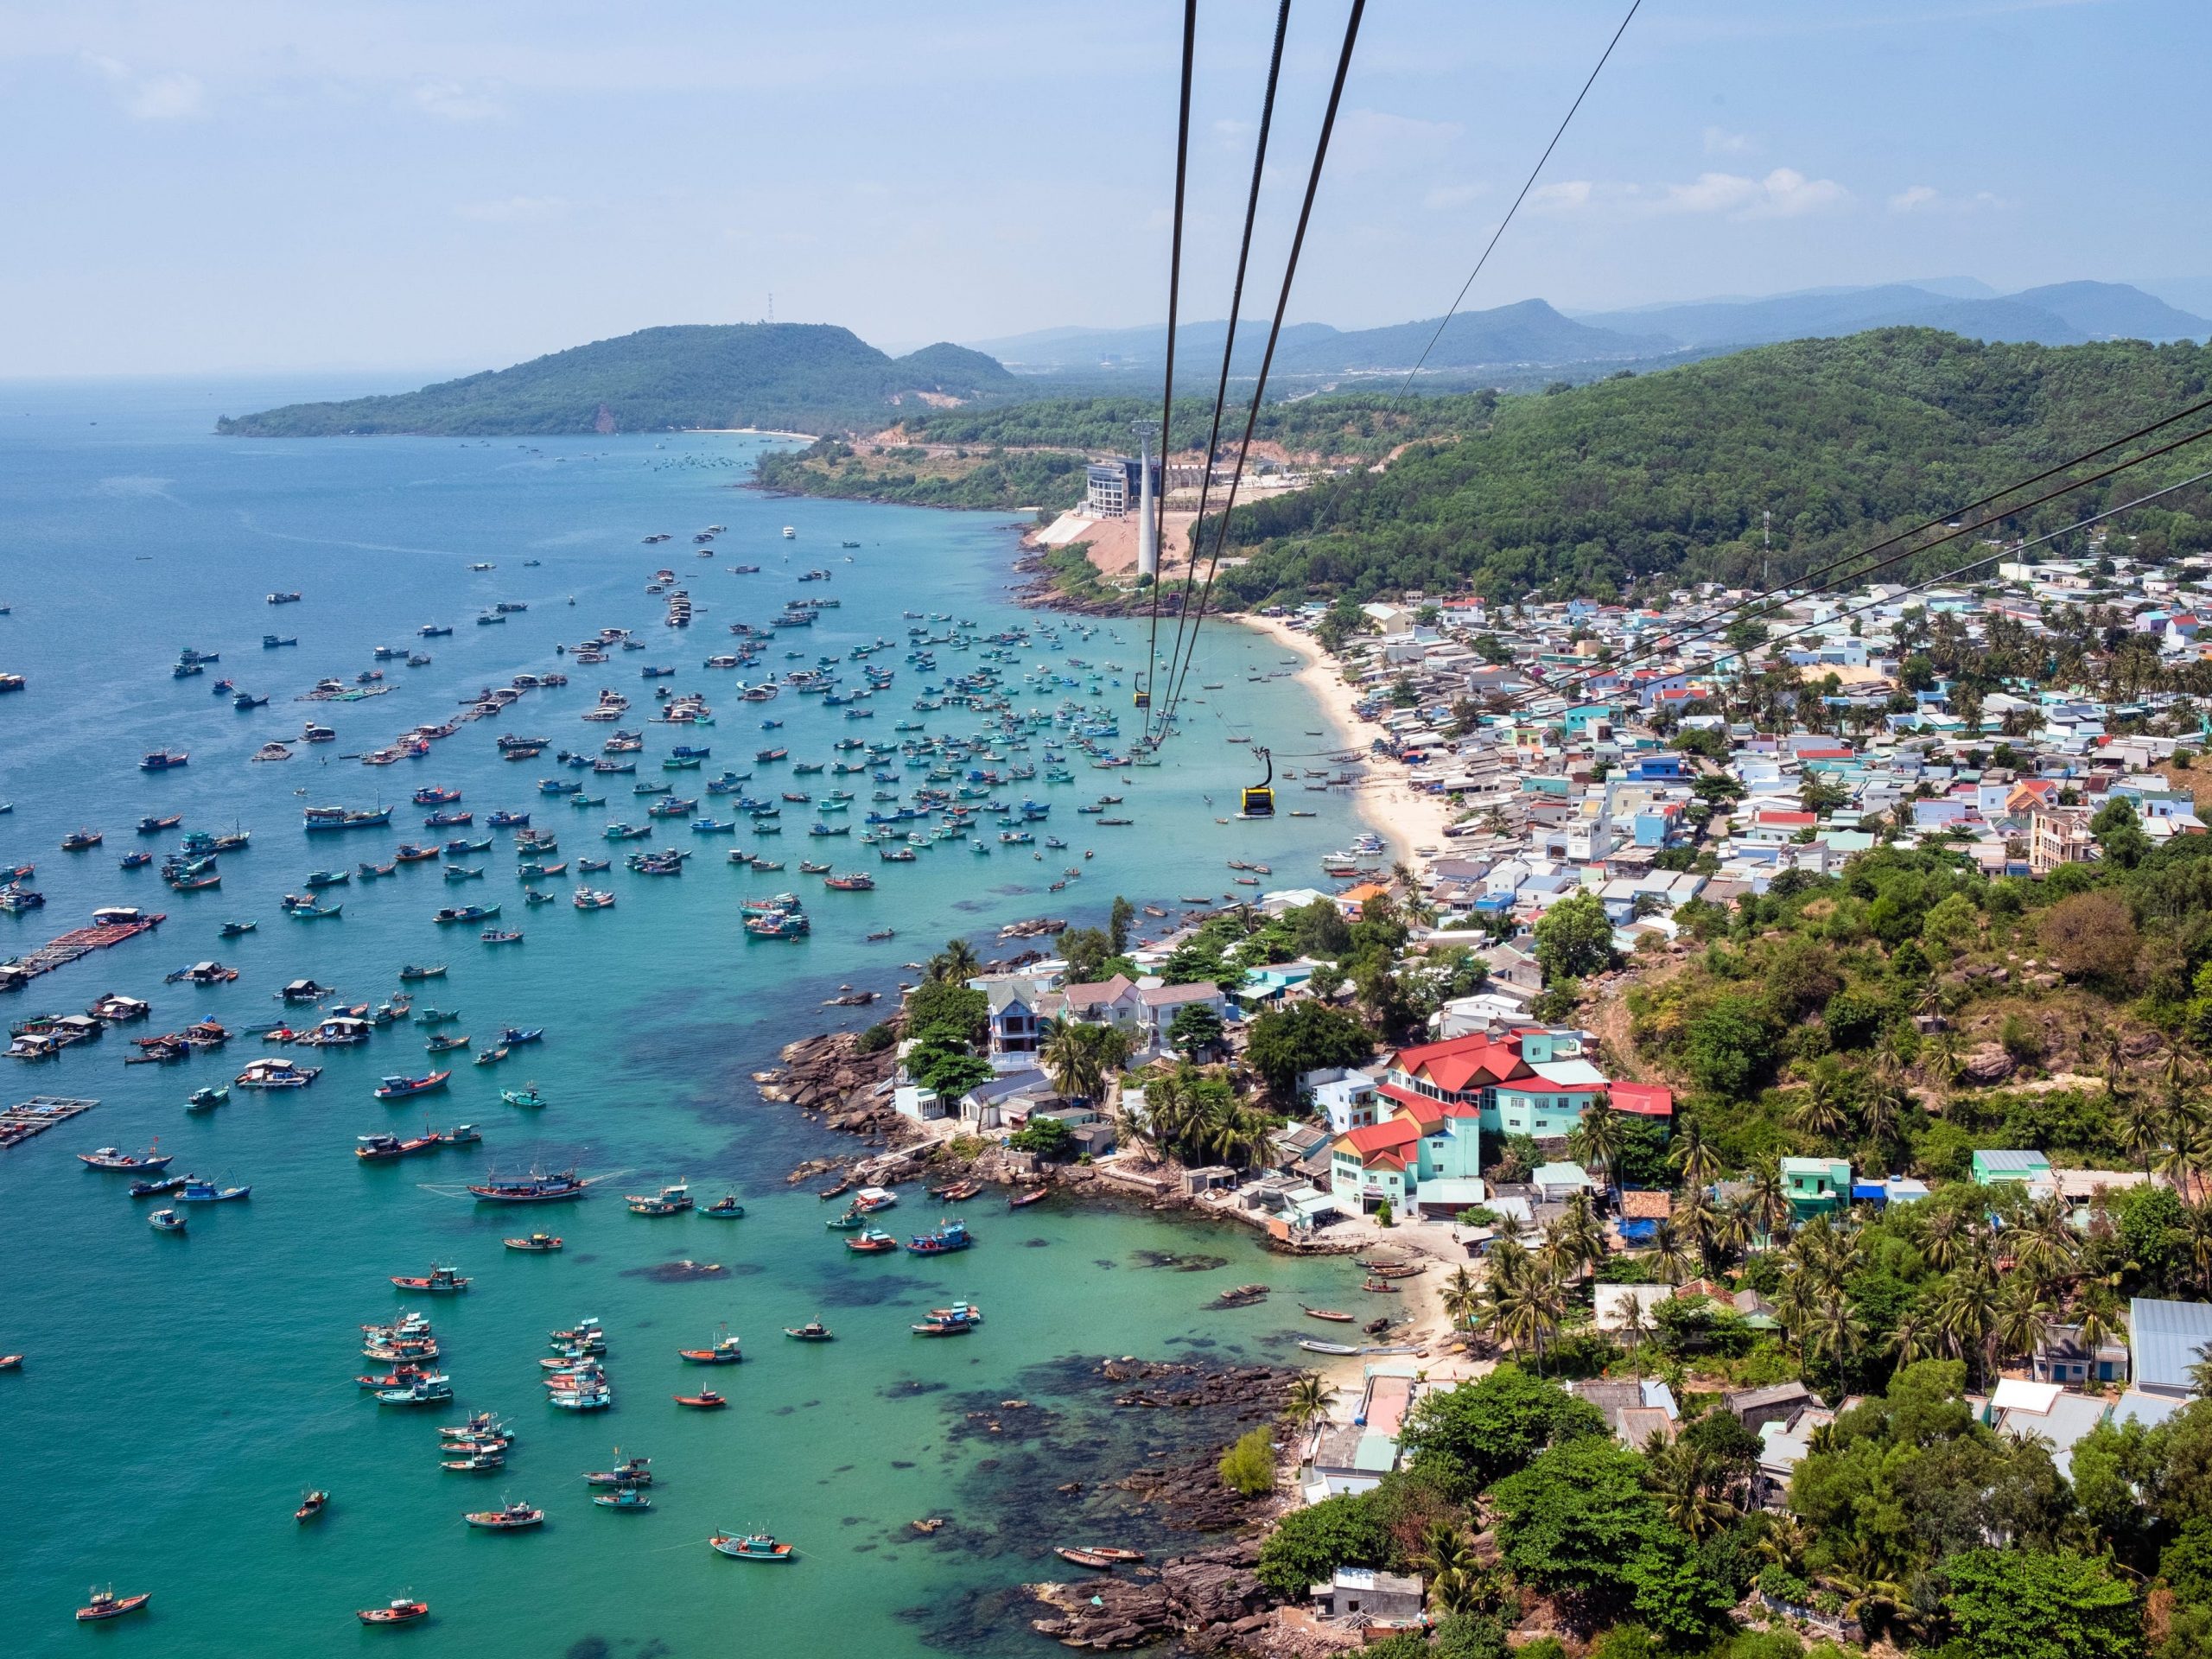 An aerial view of an island shows fishing boats in a bay and a cable car stretching across the beach